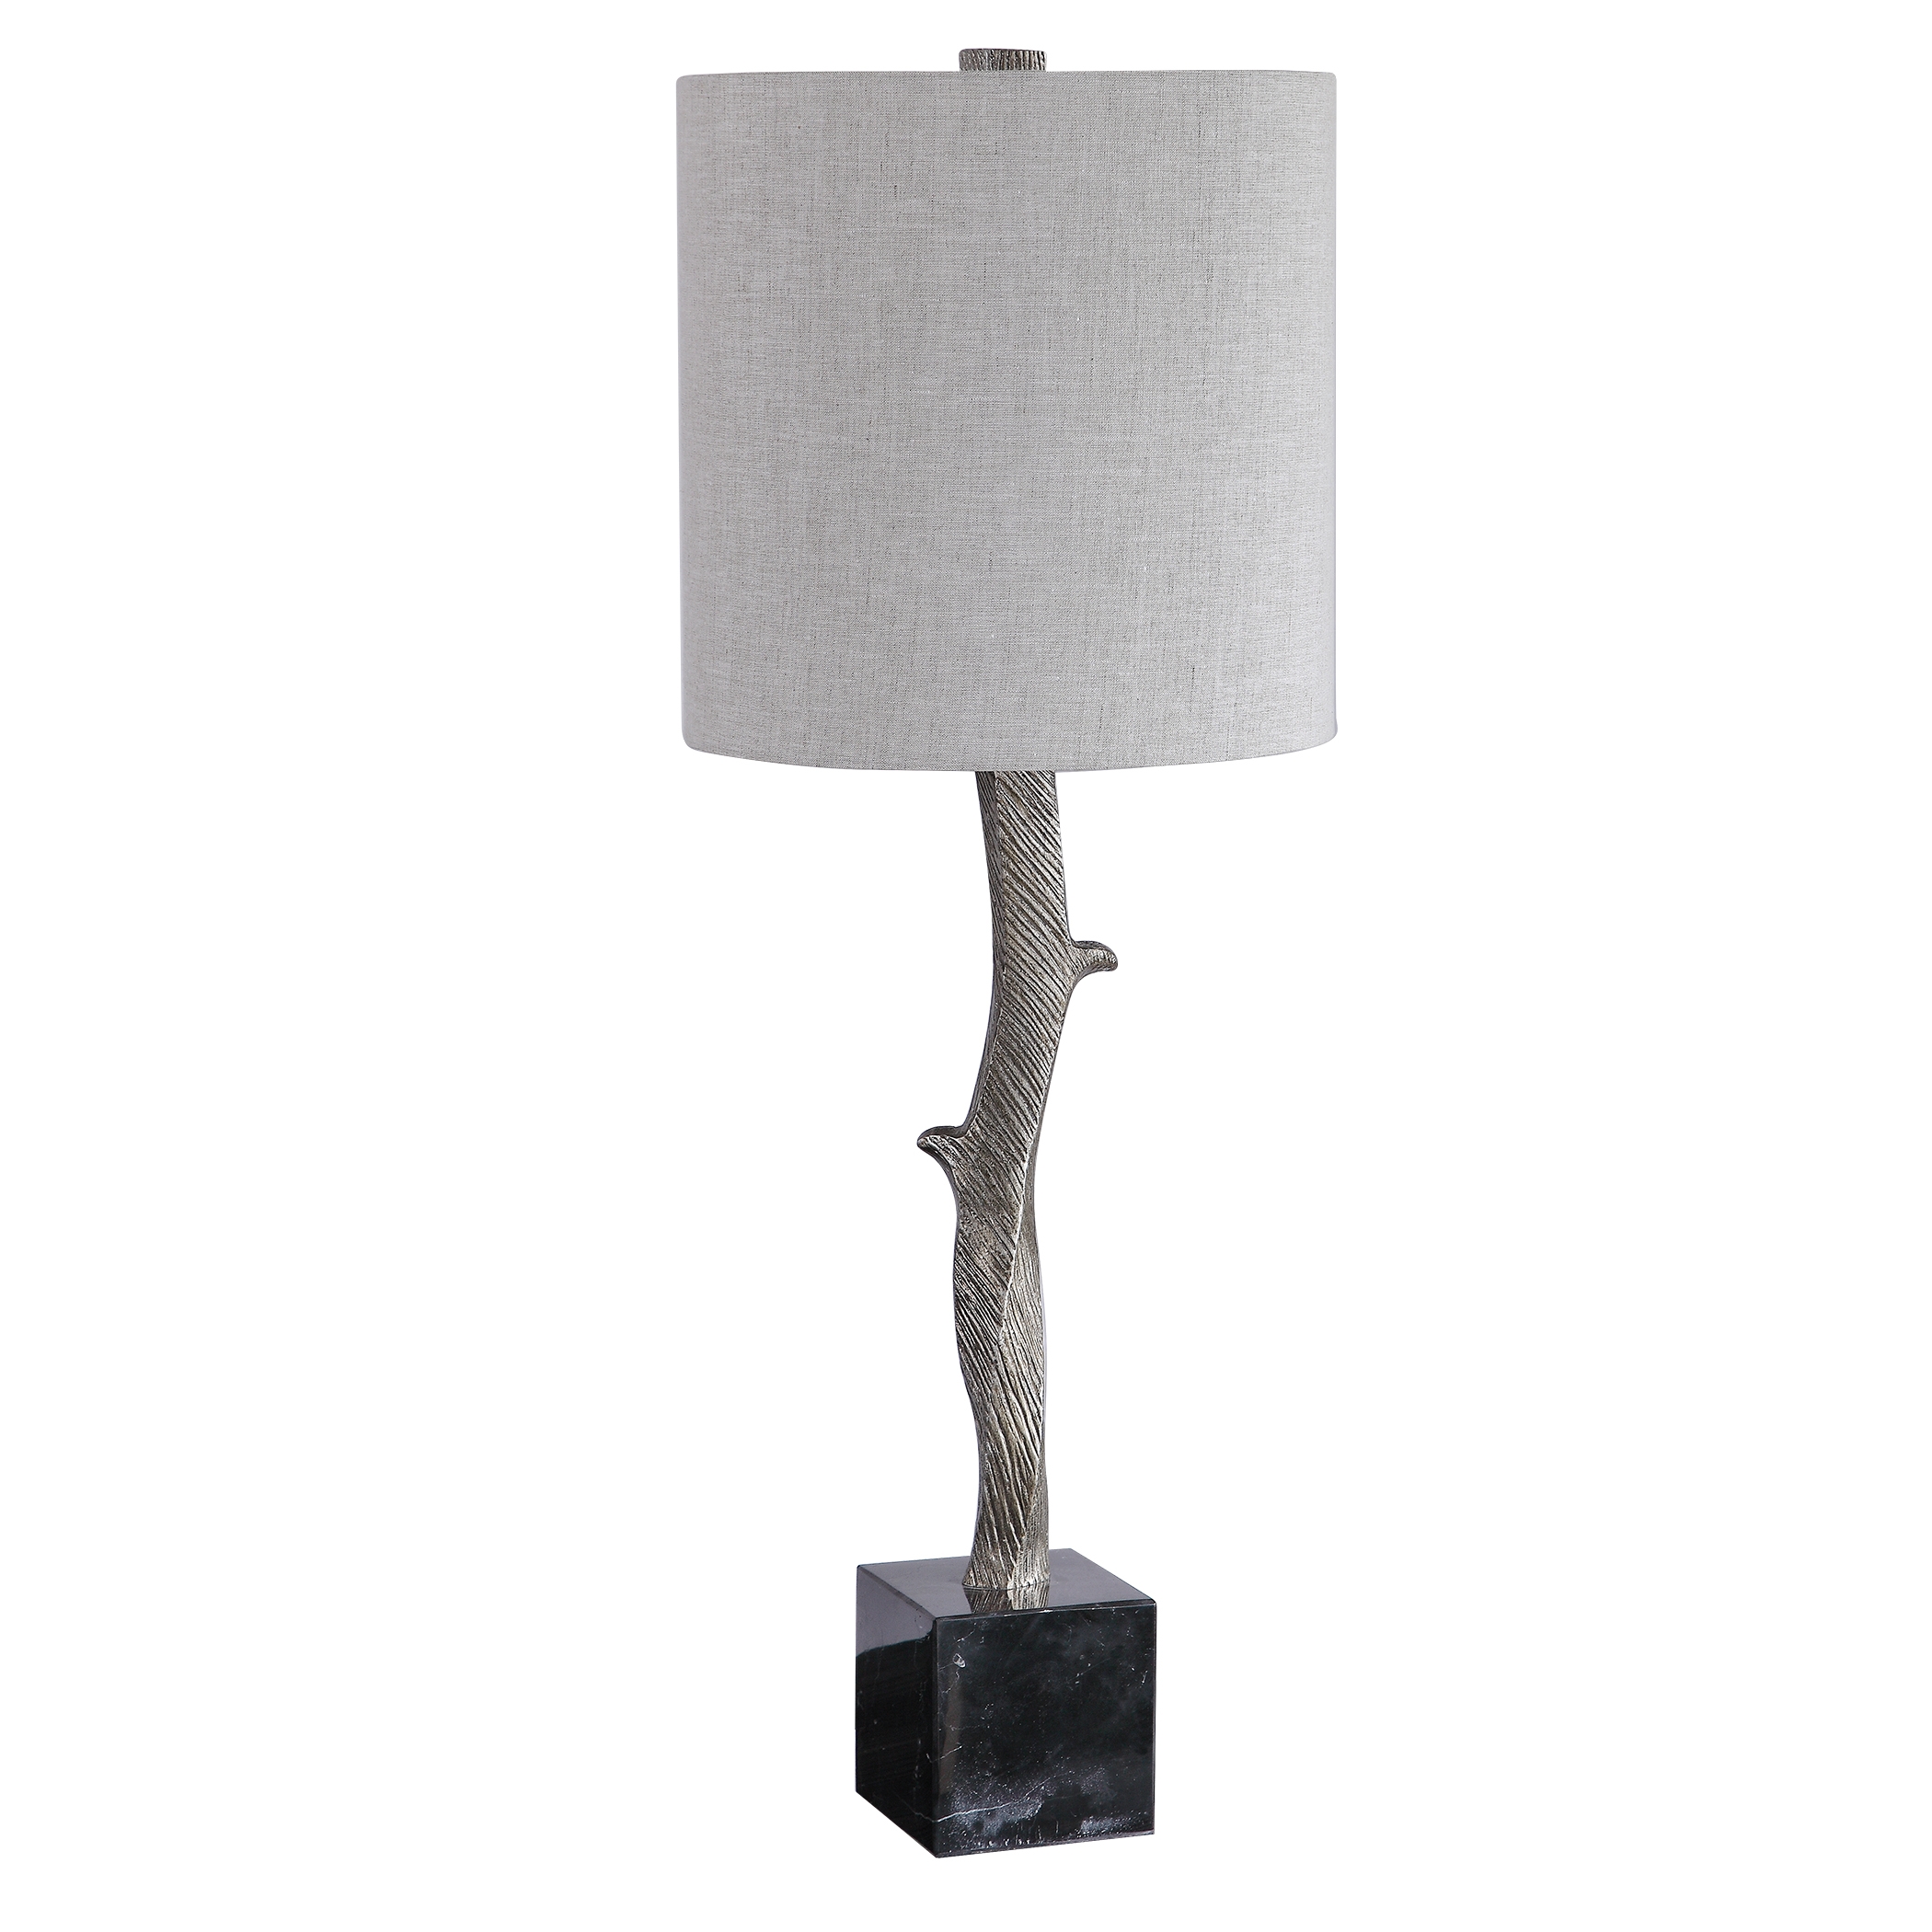 Iver Branch Accent Lamp - Image 7